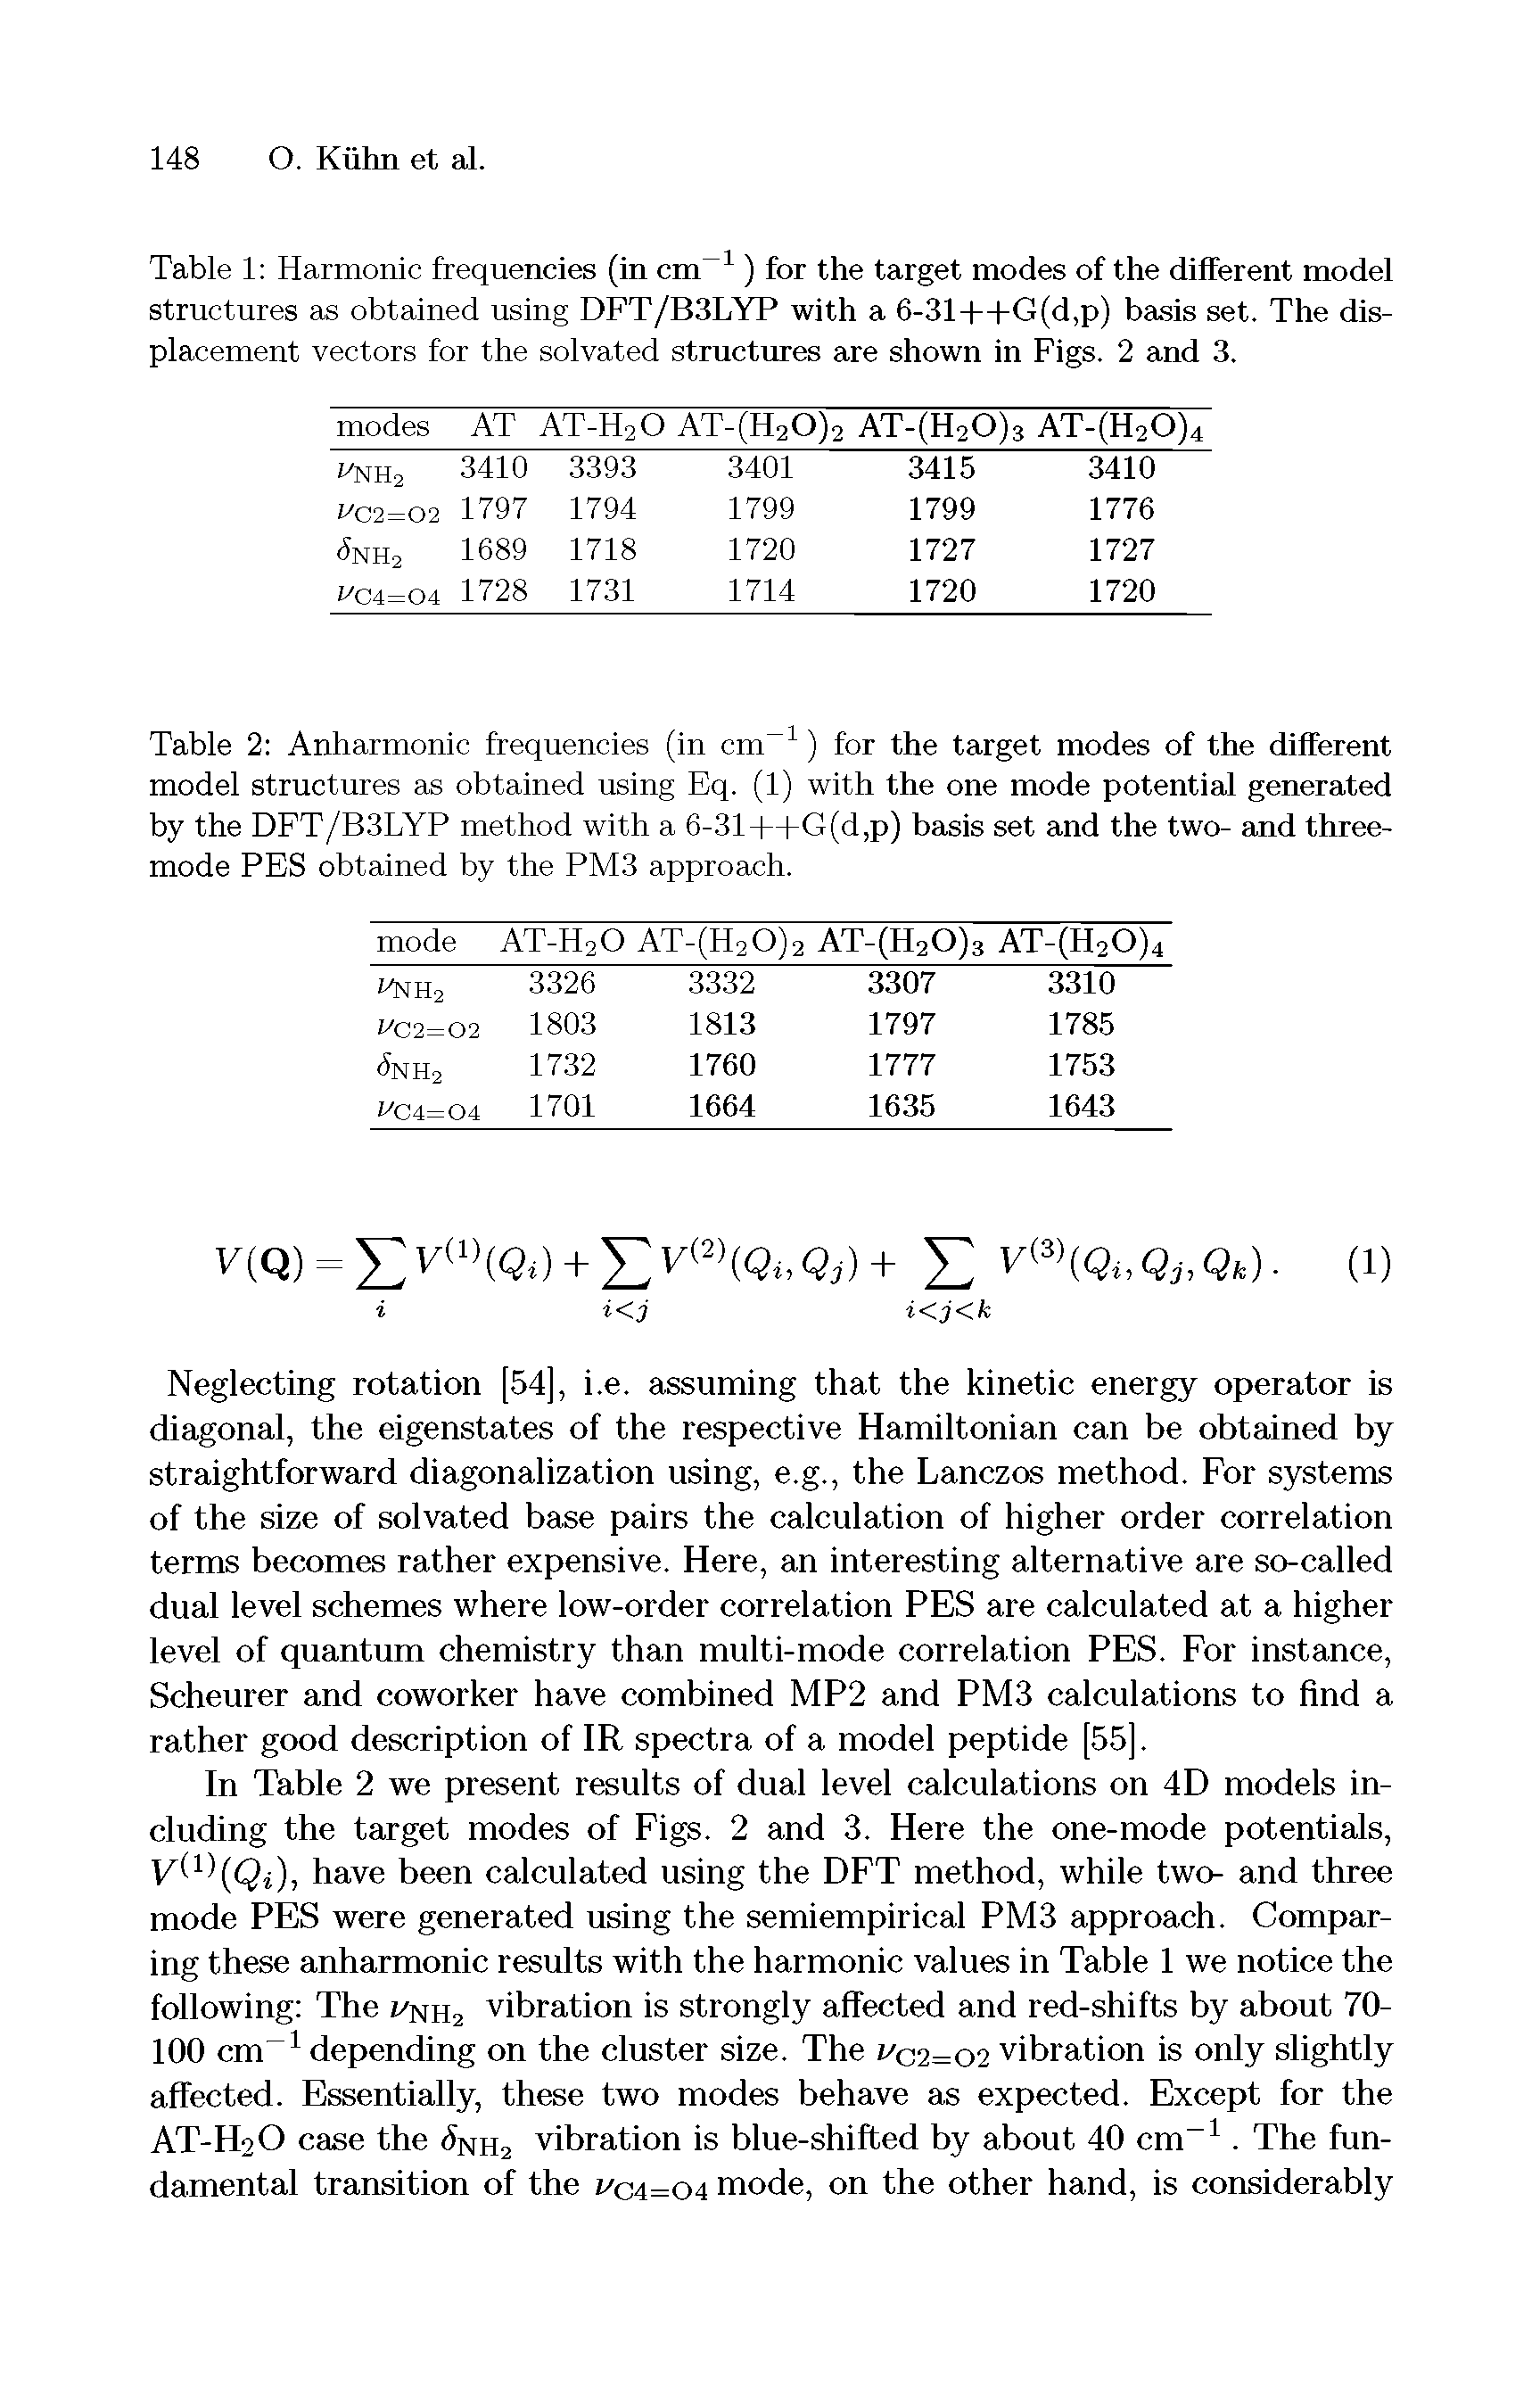 Table 2 Anharmonic frequencies (in cm-1) for the target modes of the different model structures as obtained using Eq. (1) with the one mode potential generated by the DFT/B3LYP method with a 6-31++G(d,p) basis set and the two- and threemode PES obtained by the PM3 approach.